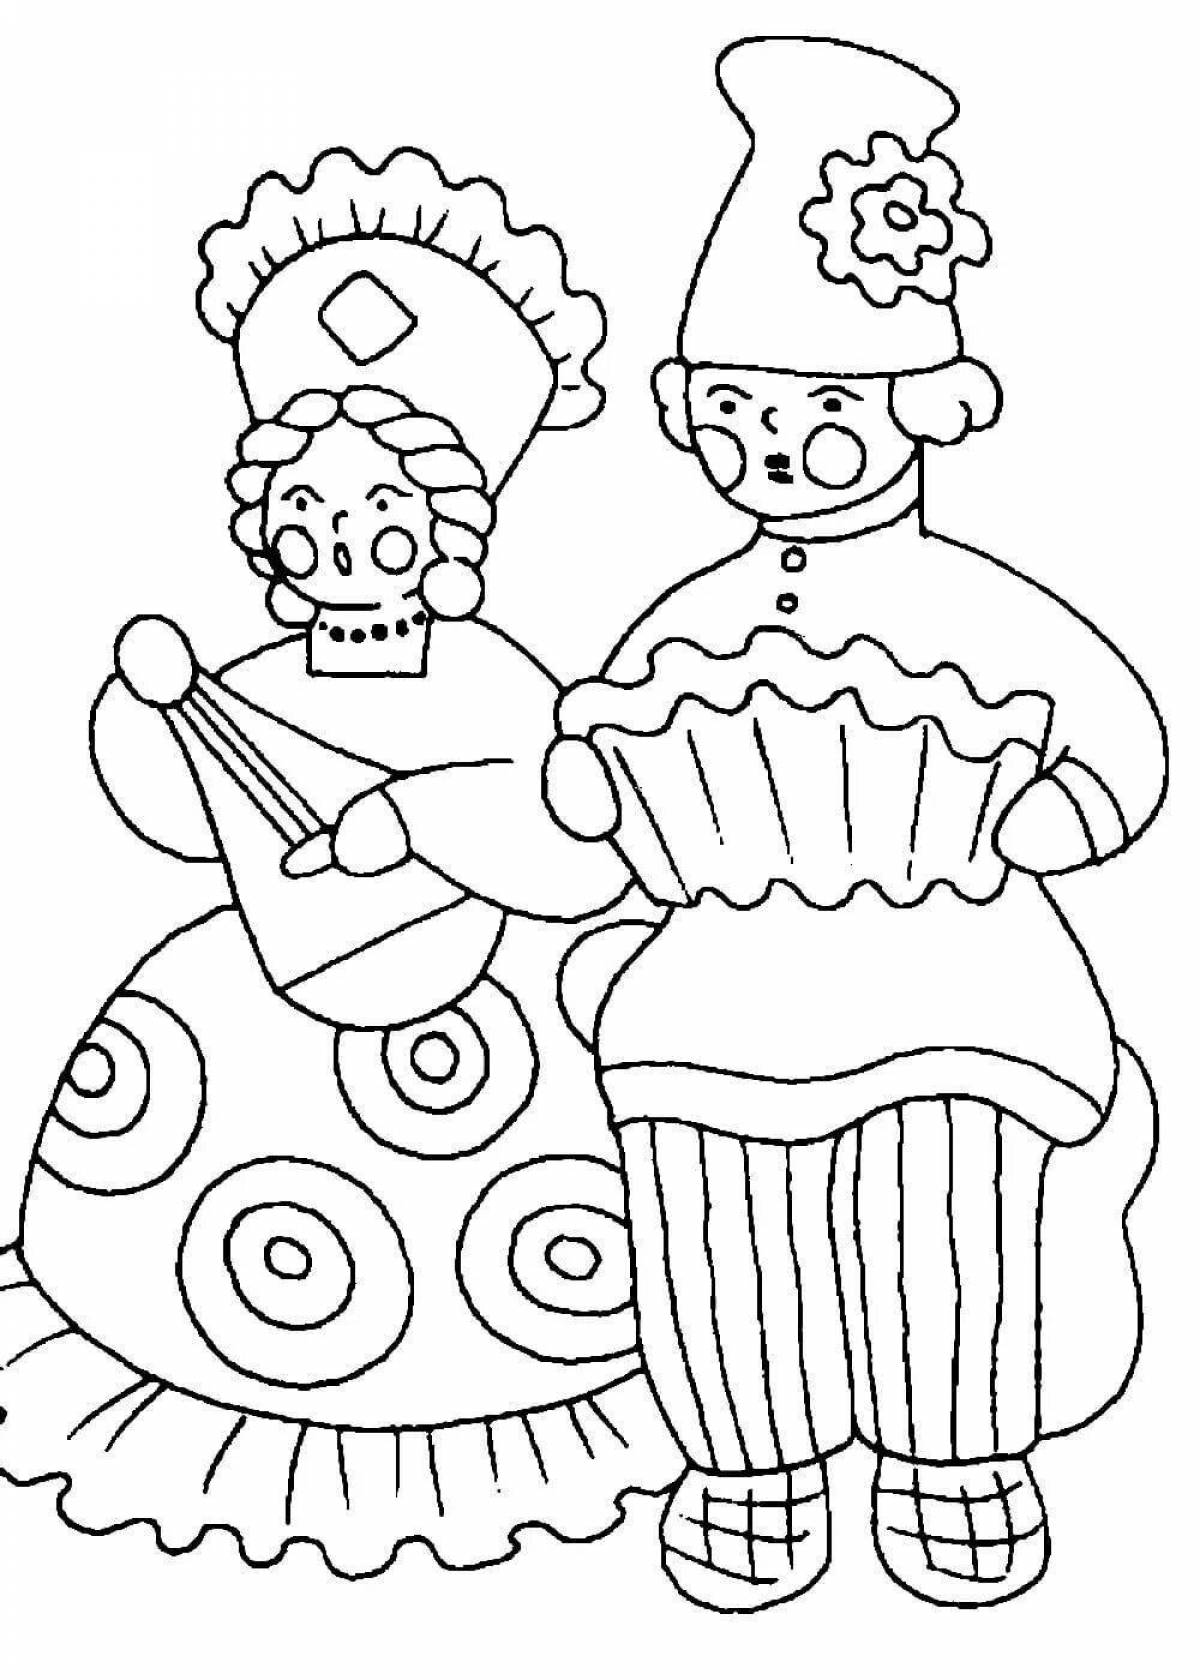 Coloring book funny roman toy